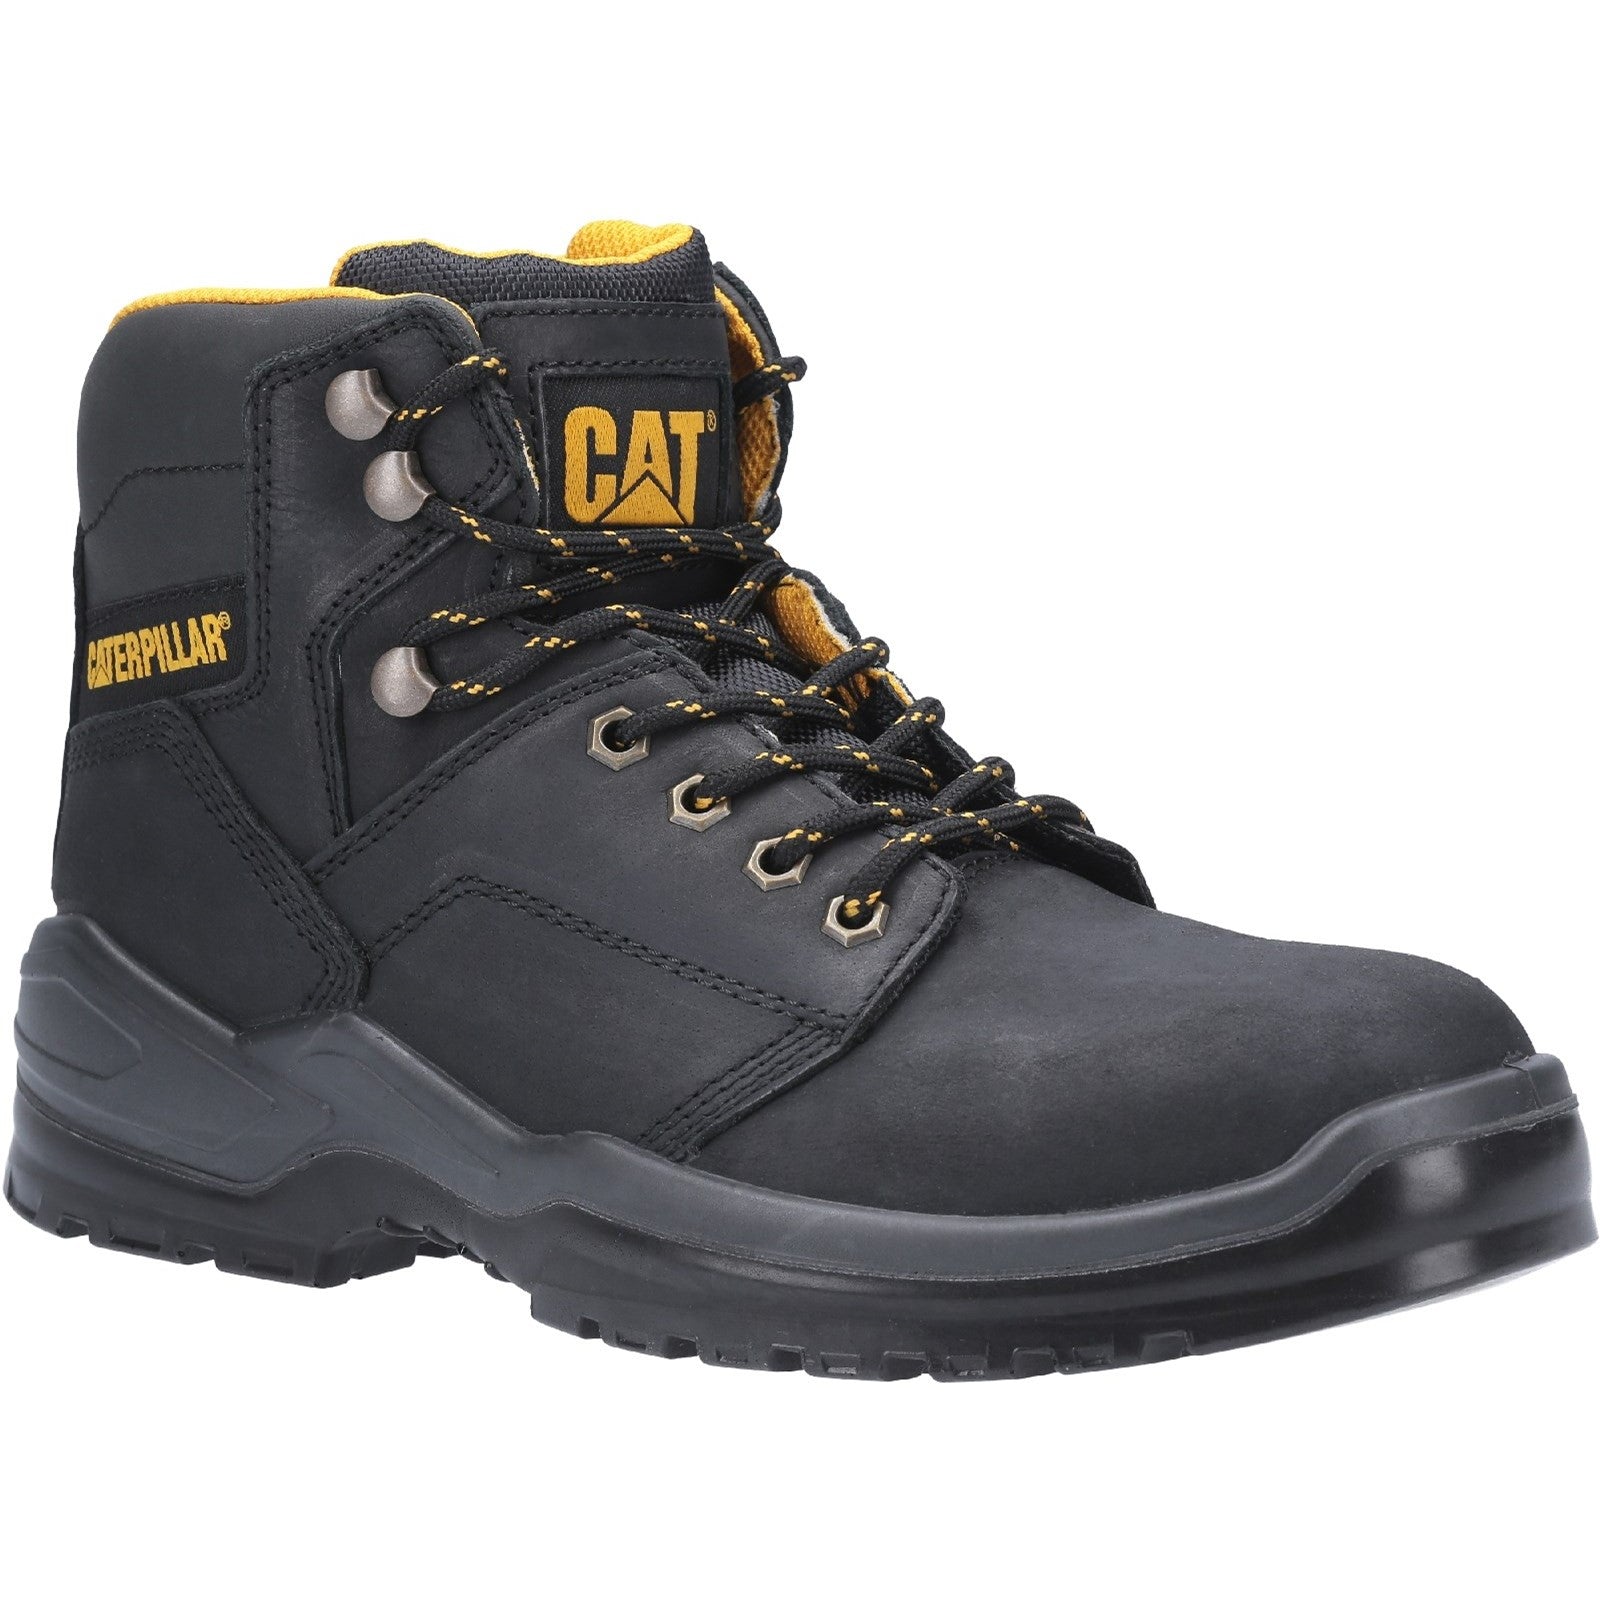 CAT Striver Injected Safety Boot